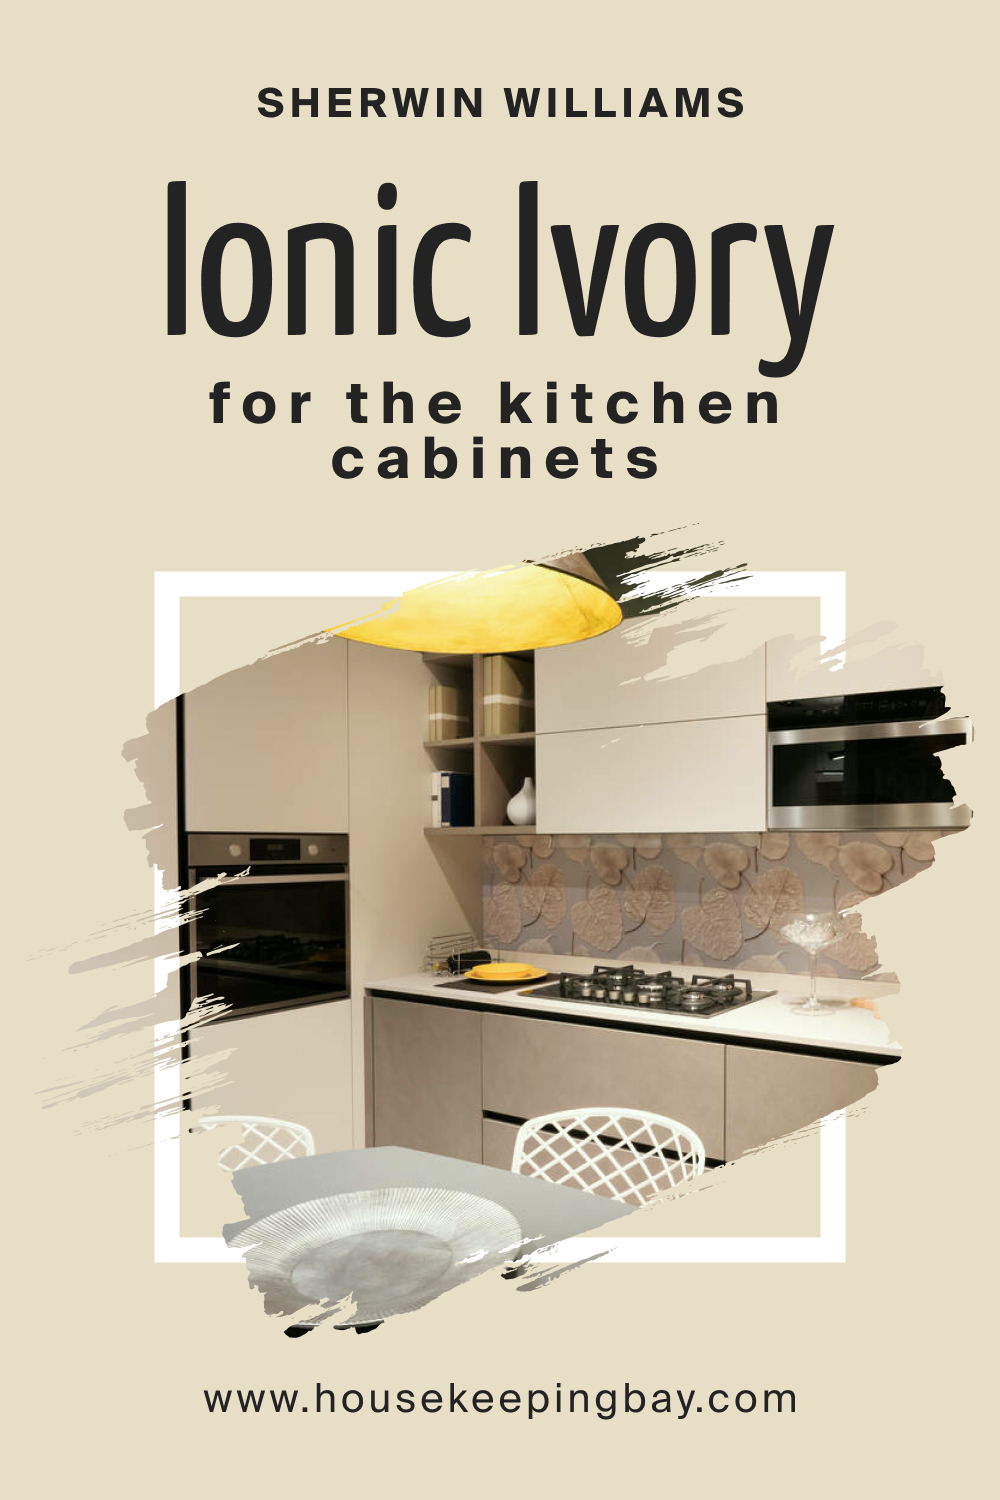 Sherwin Williams. SW 6406 Ionic Ivory For the Kitchen Cabinets